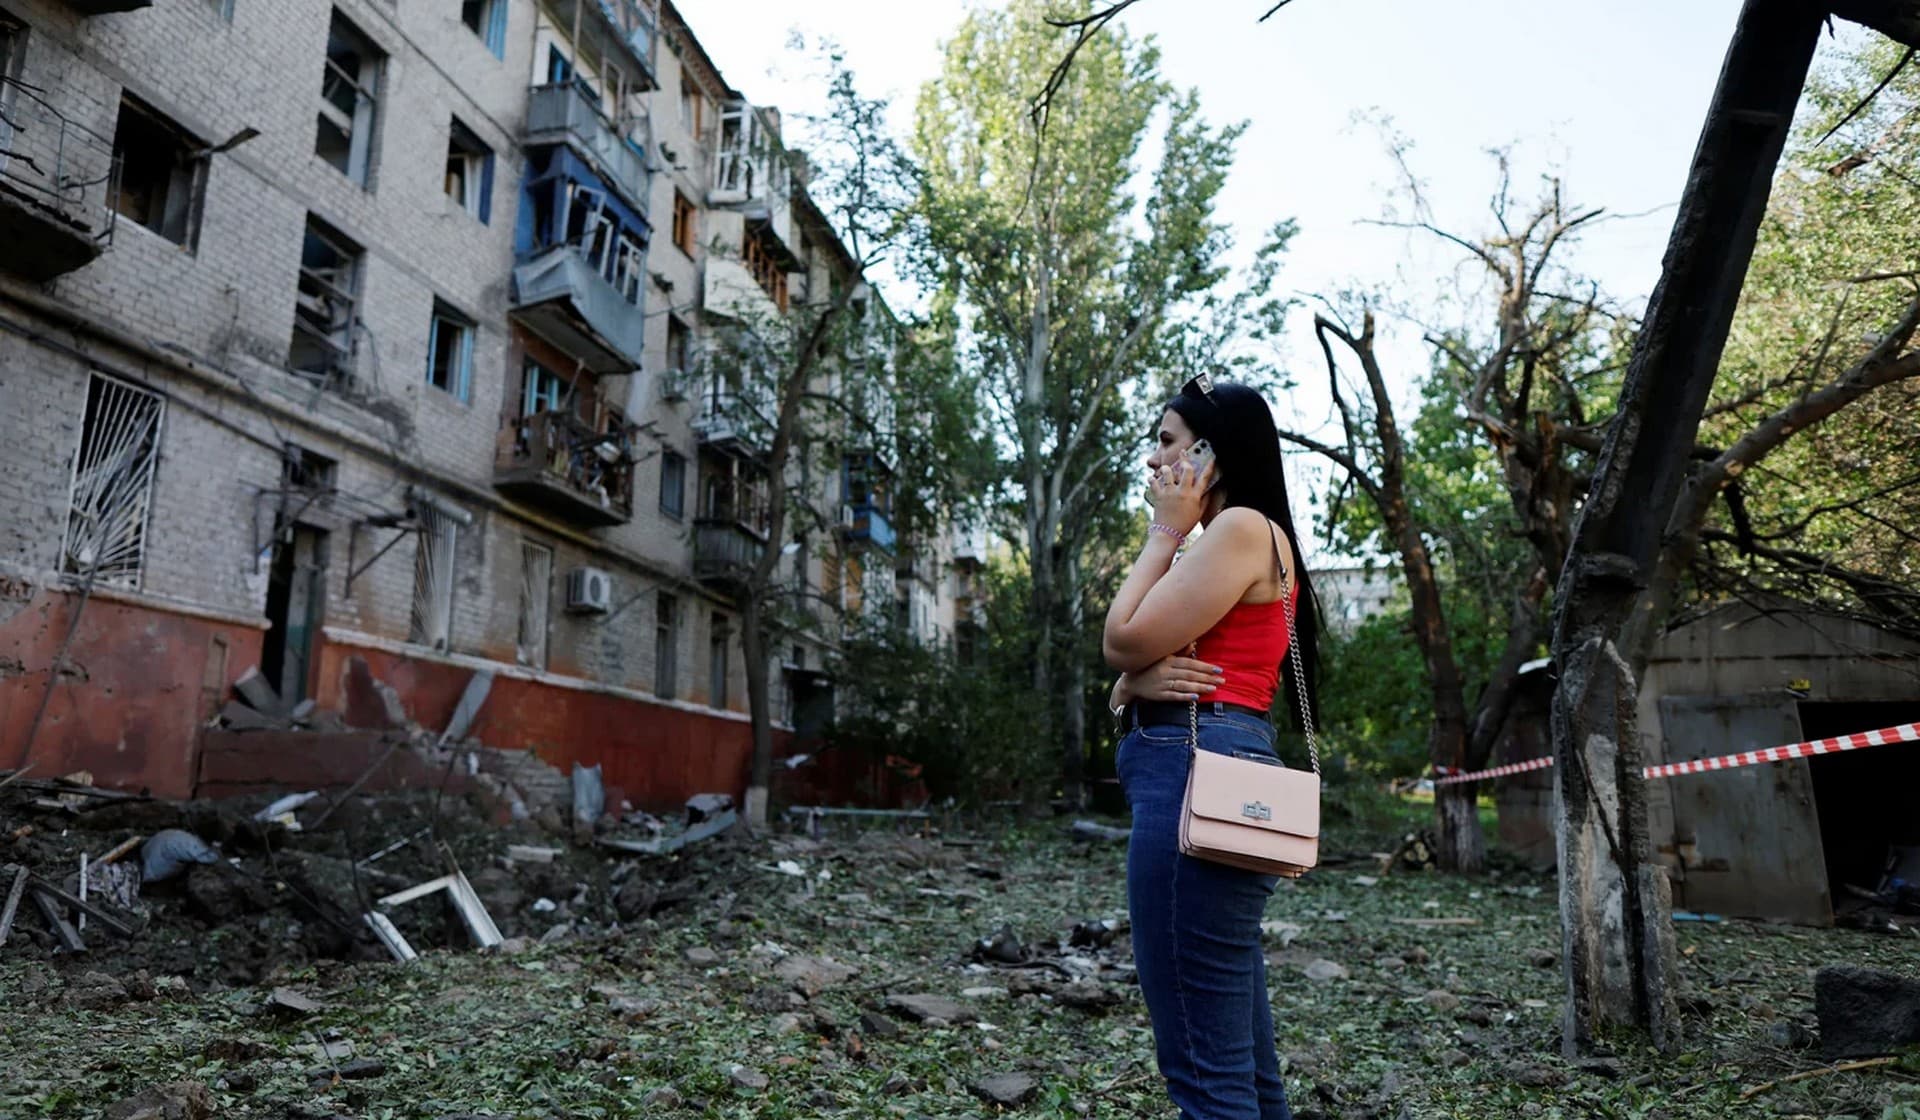 A Ukrainian woman uses her mobile phone in front of a residential building damaged after a Russian strike in Kramatorsk